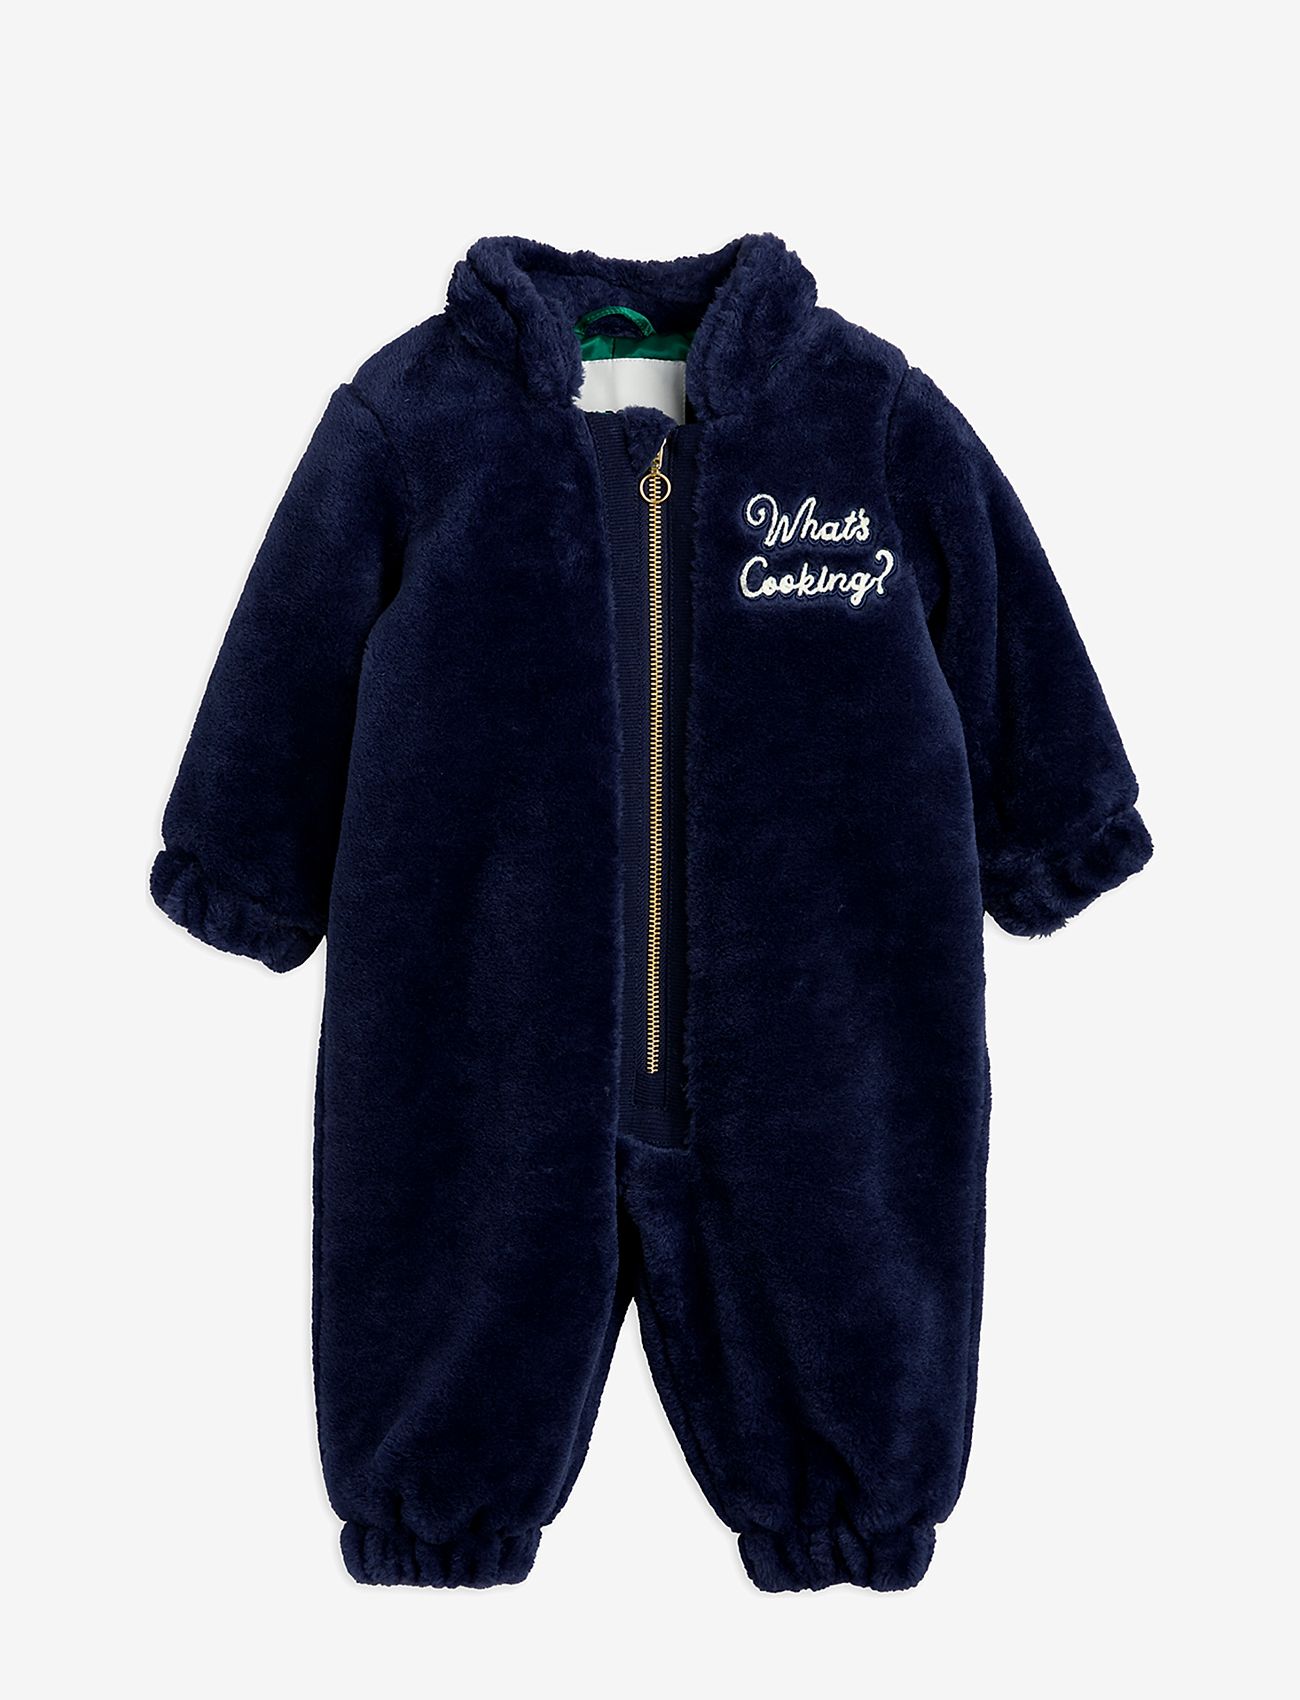 Mini Rodini - What's cooking faux fur baby overall - schneeanzug - navy - 1